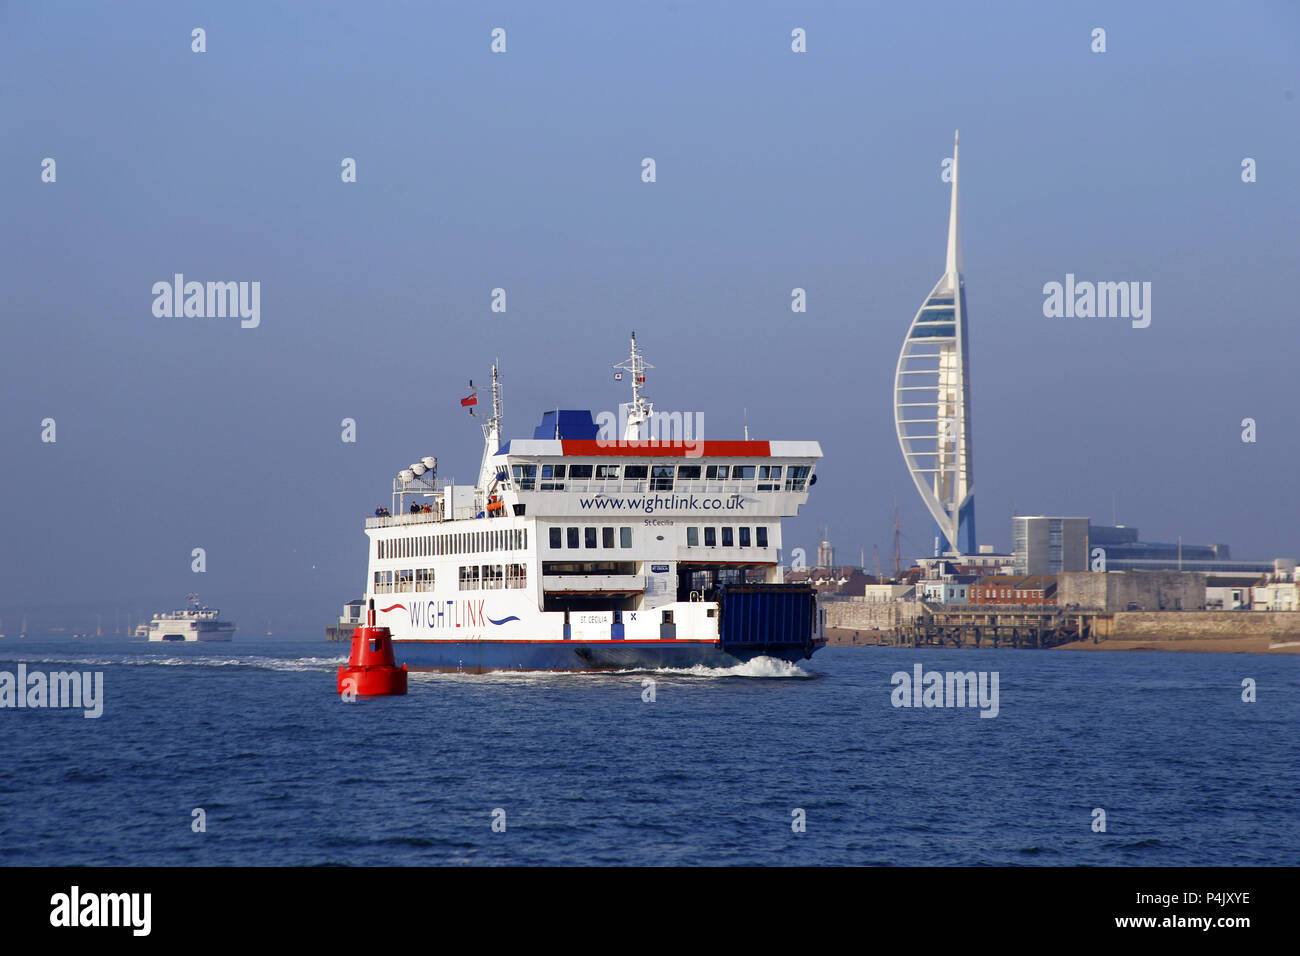 Wight Link Car Ferry St Cecilia leaving Portsmouth Harbour en route to the Isle of Wight Stock Photo